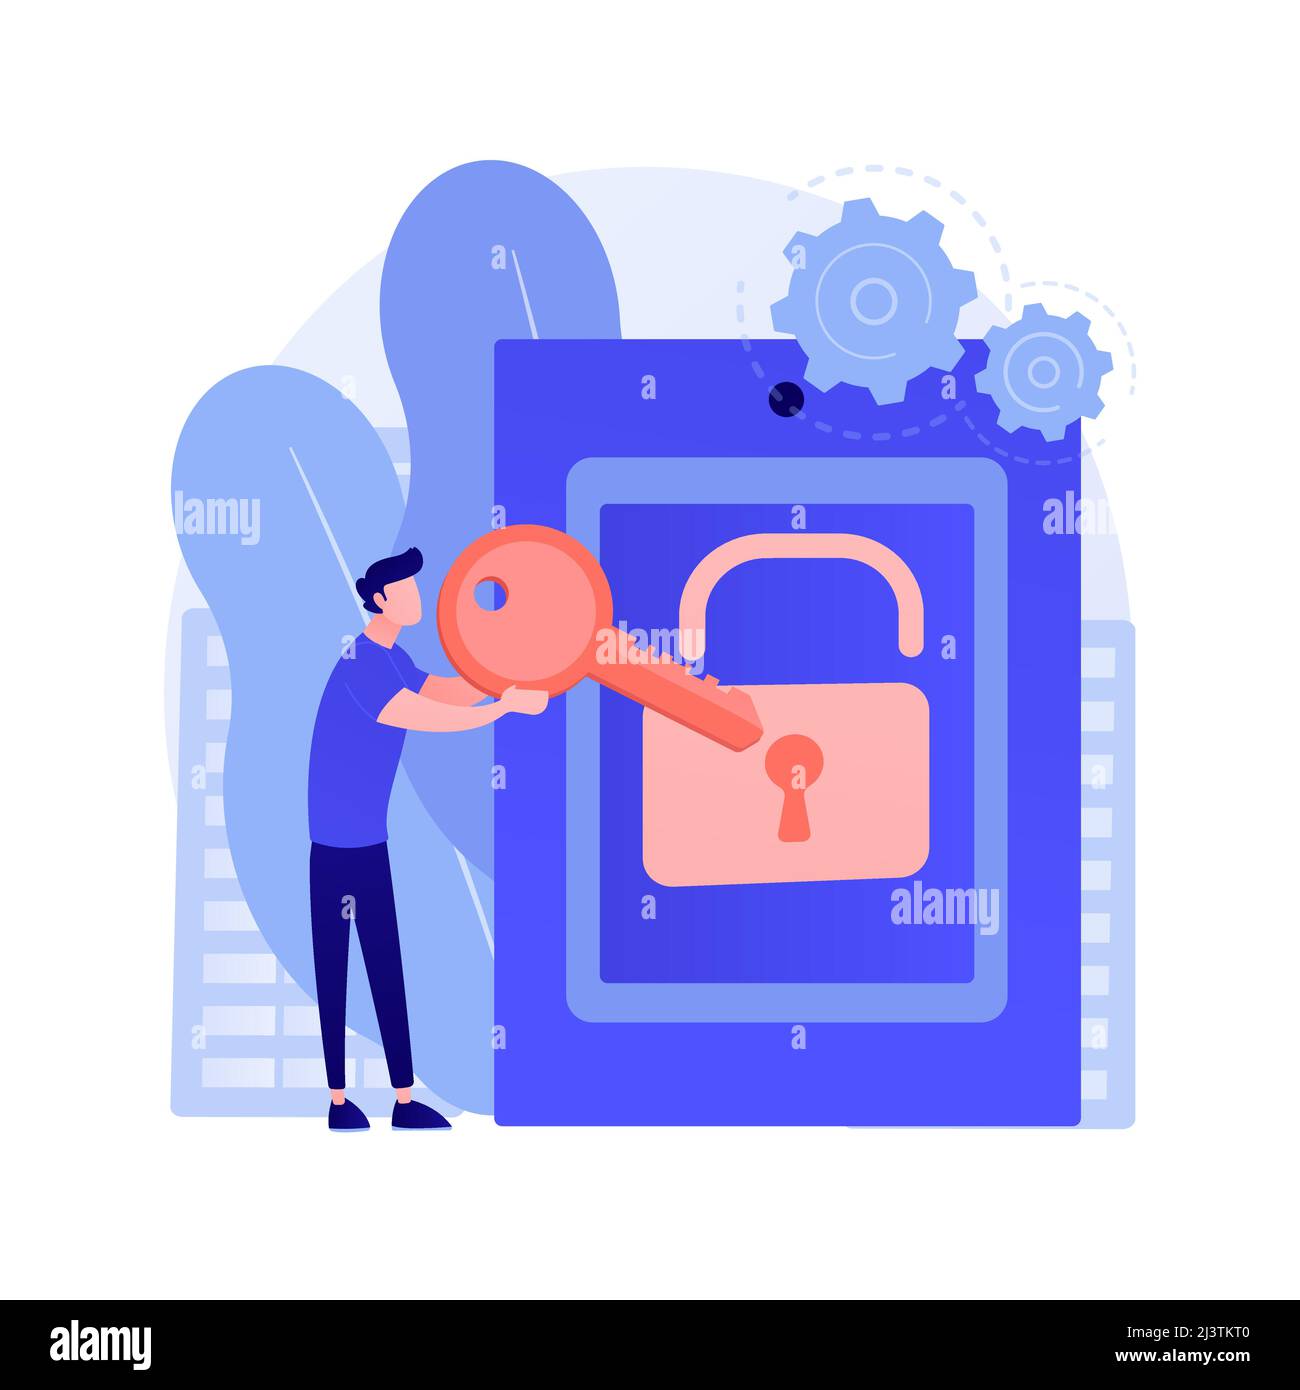 Access control system abstract concept vector illustration. Security system, authorize entry, login credentials, electronic access, password, pass-phr Stock Vector